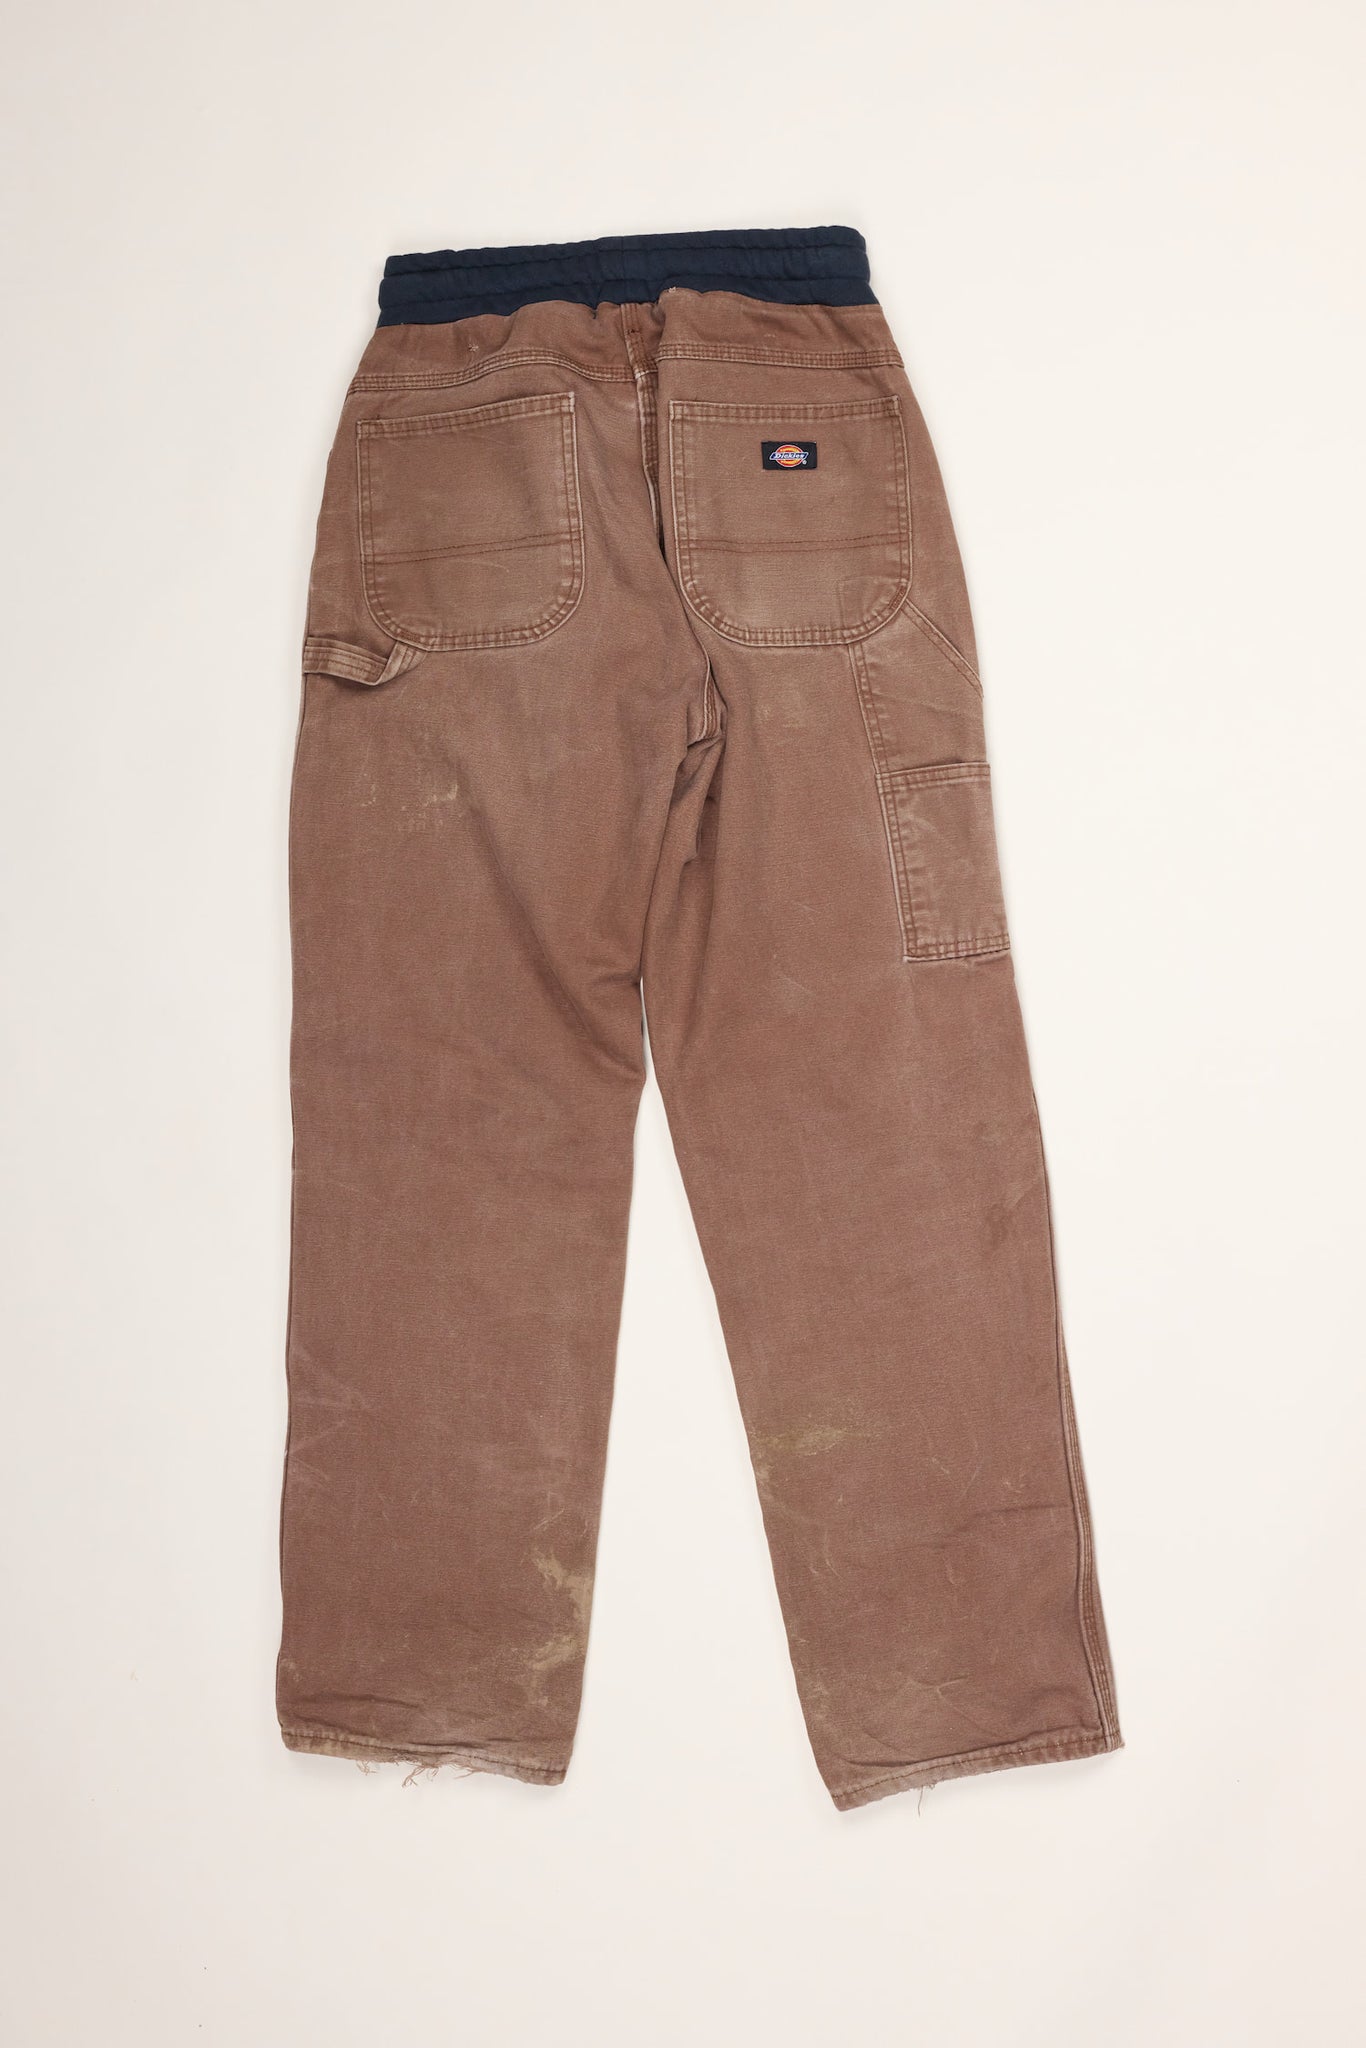 Dickies - DC Carpenter Stone Washed Black - Pants | IMPERICON US